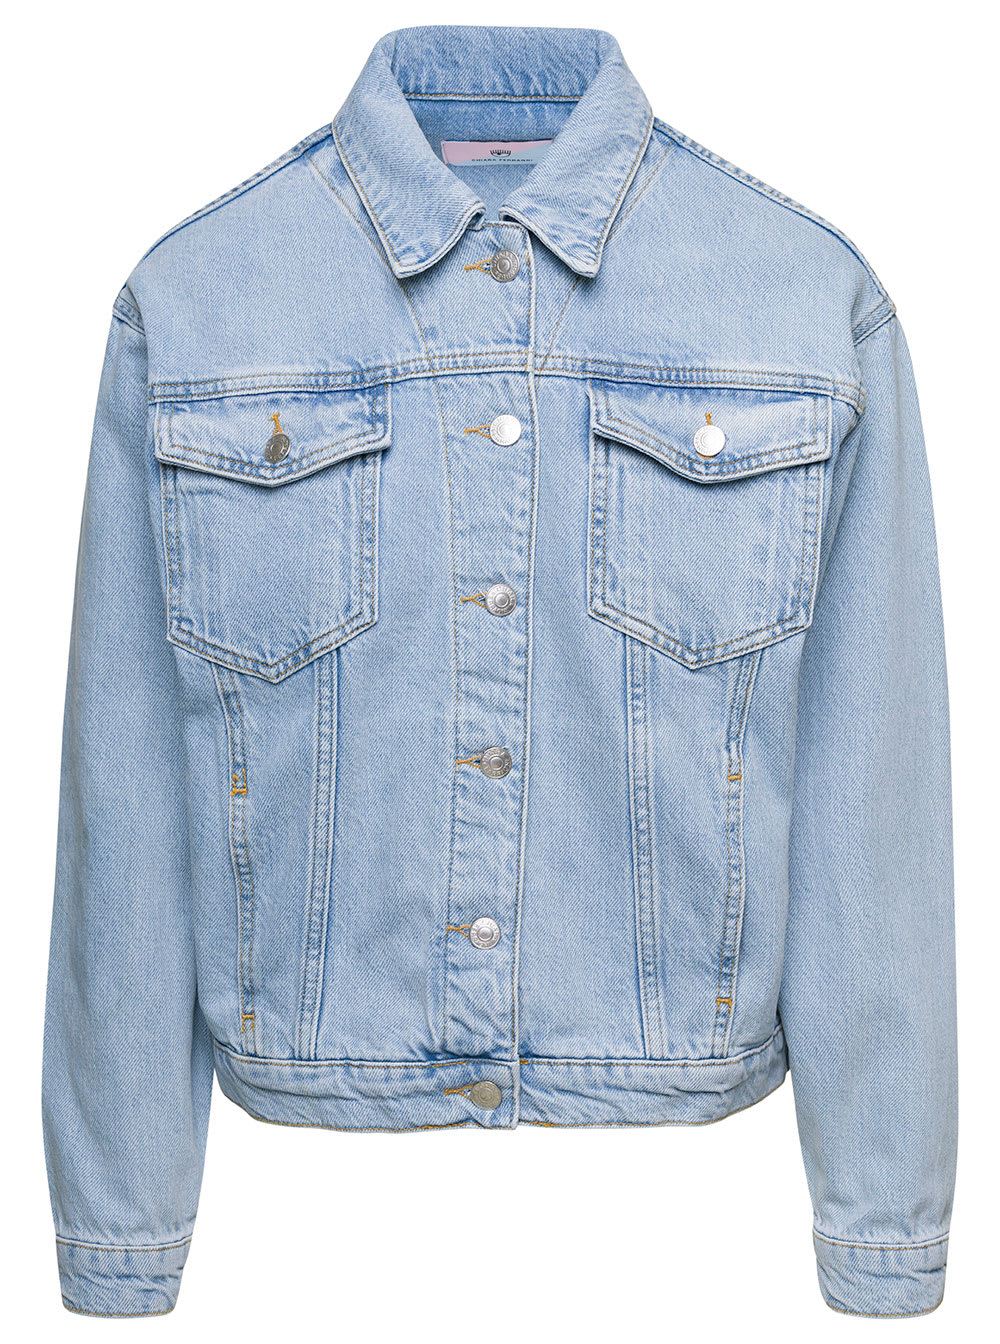 CHIARA FERRAGNI LIGHT BLUE JACKET WITH LOGO LETTERING E,MBROIDERY AT THE BACK IN COTTON DENIM WOMAN